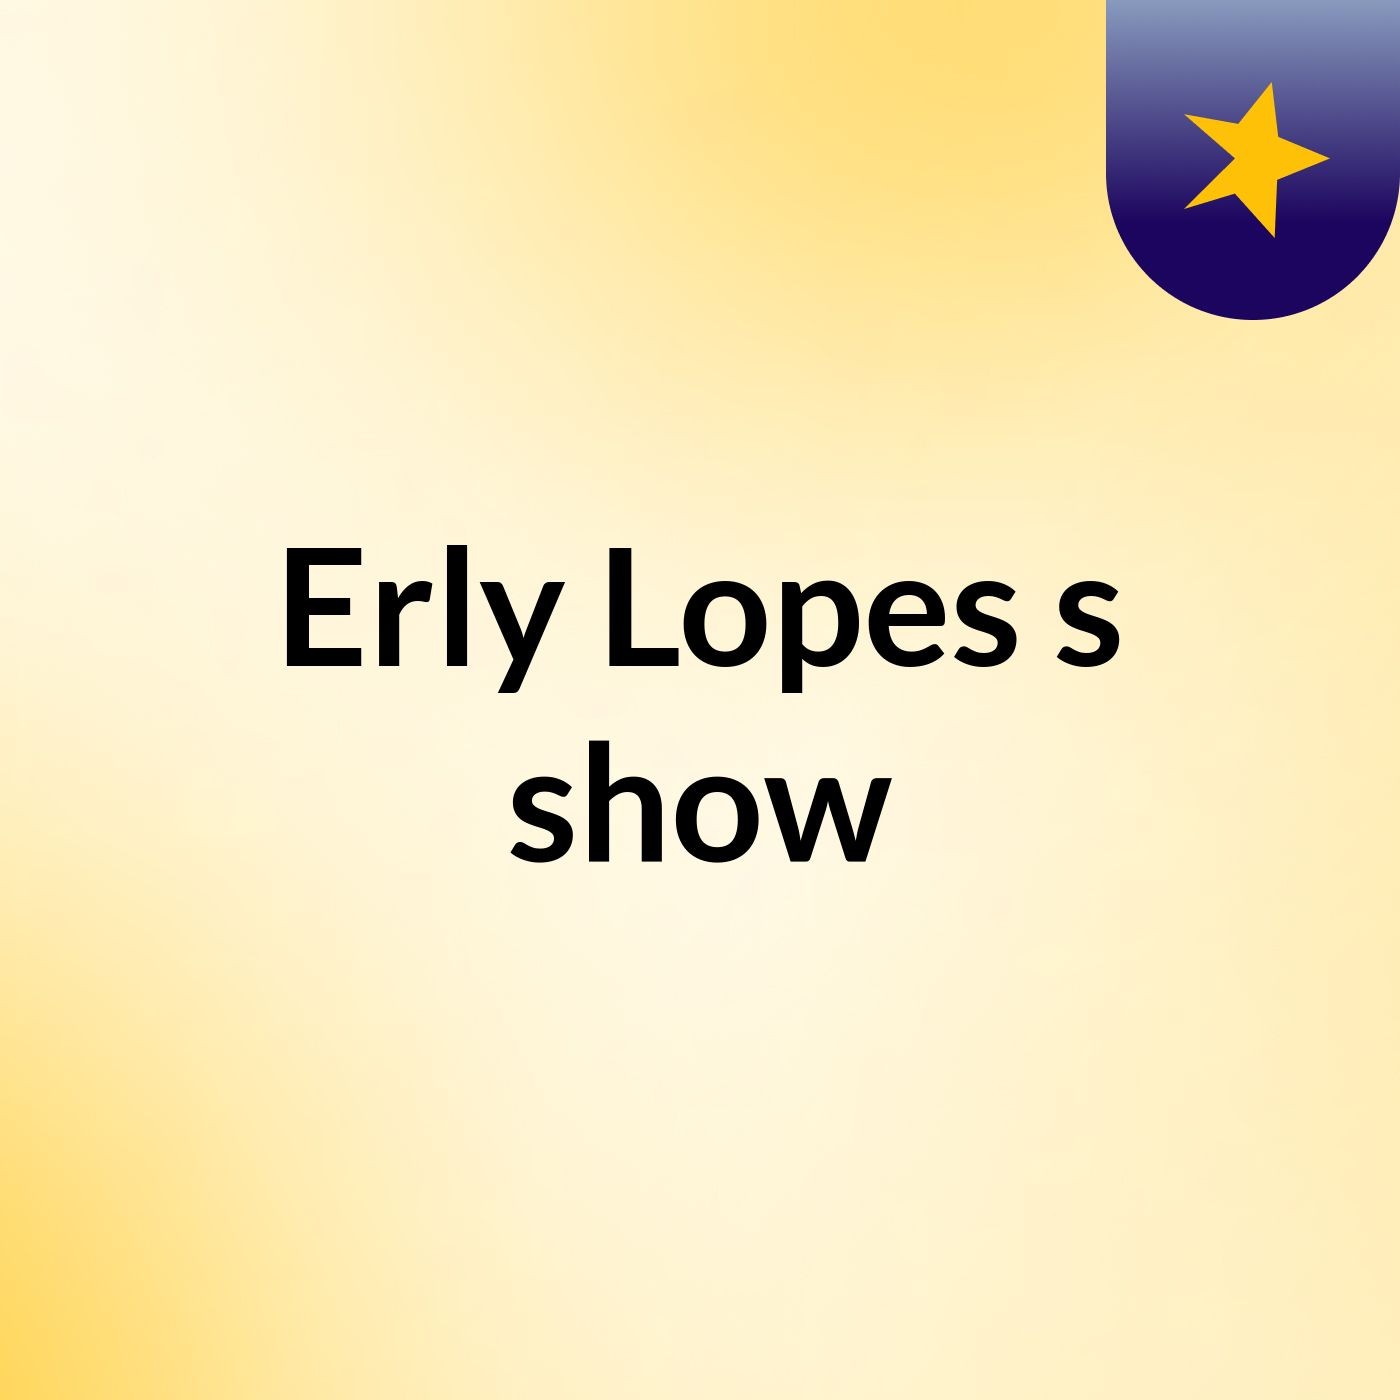 Erly Lopes's show